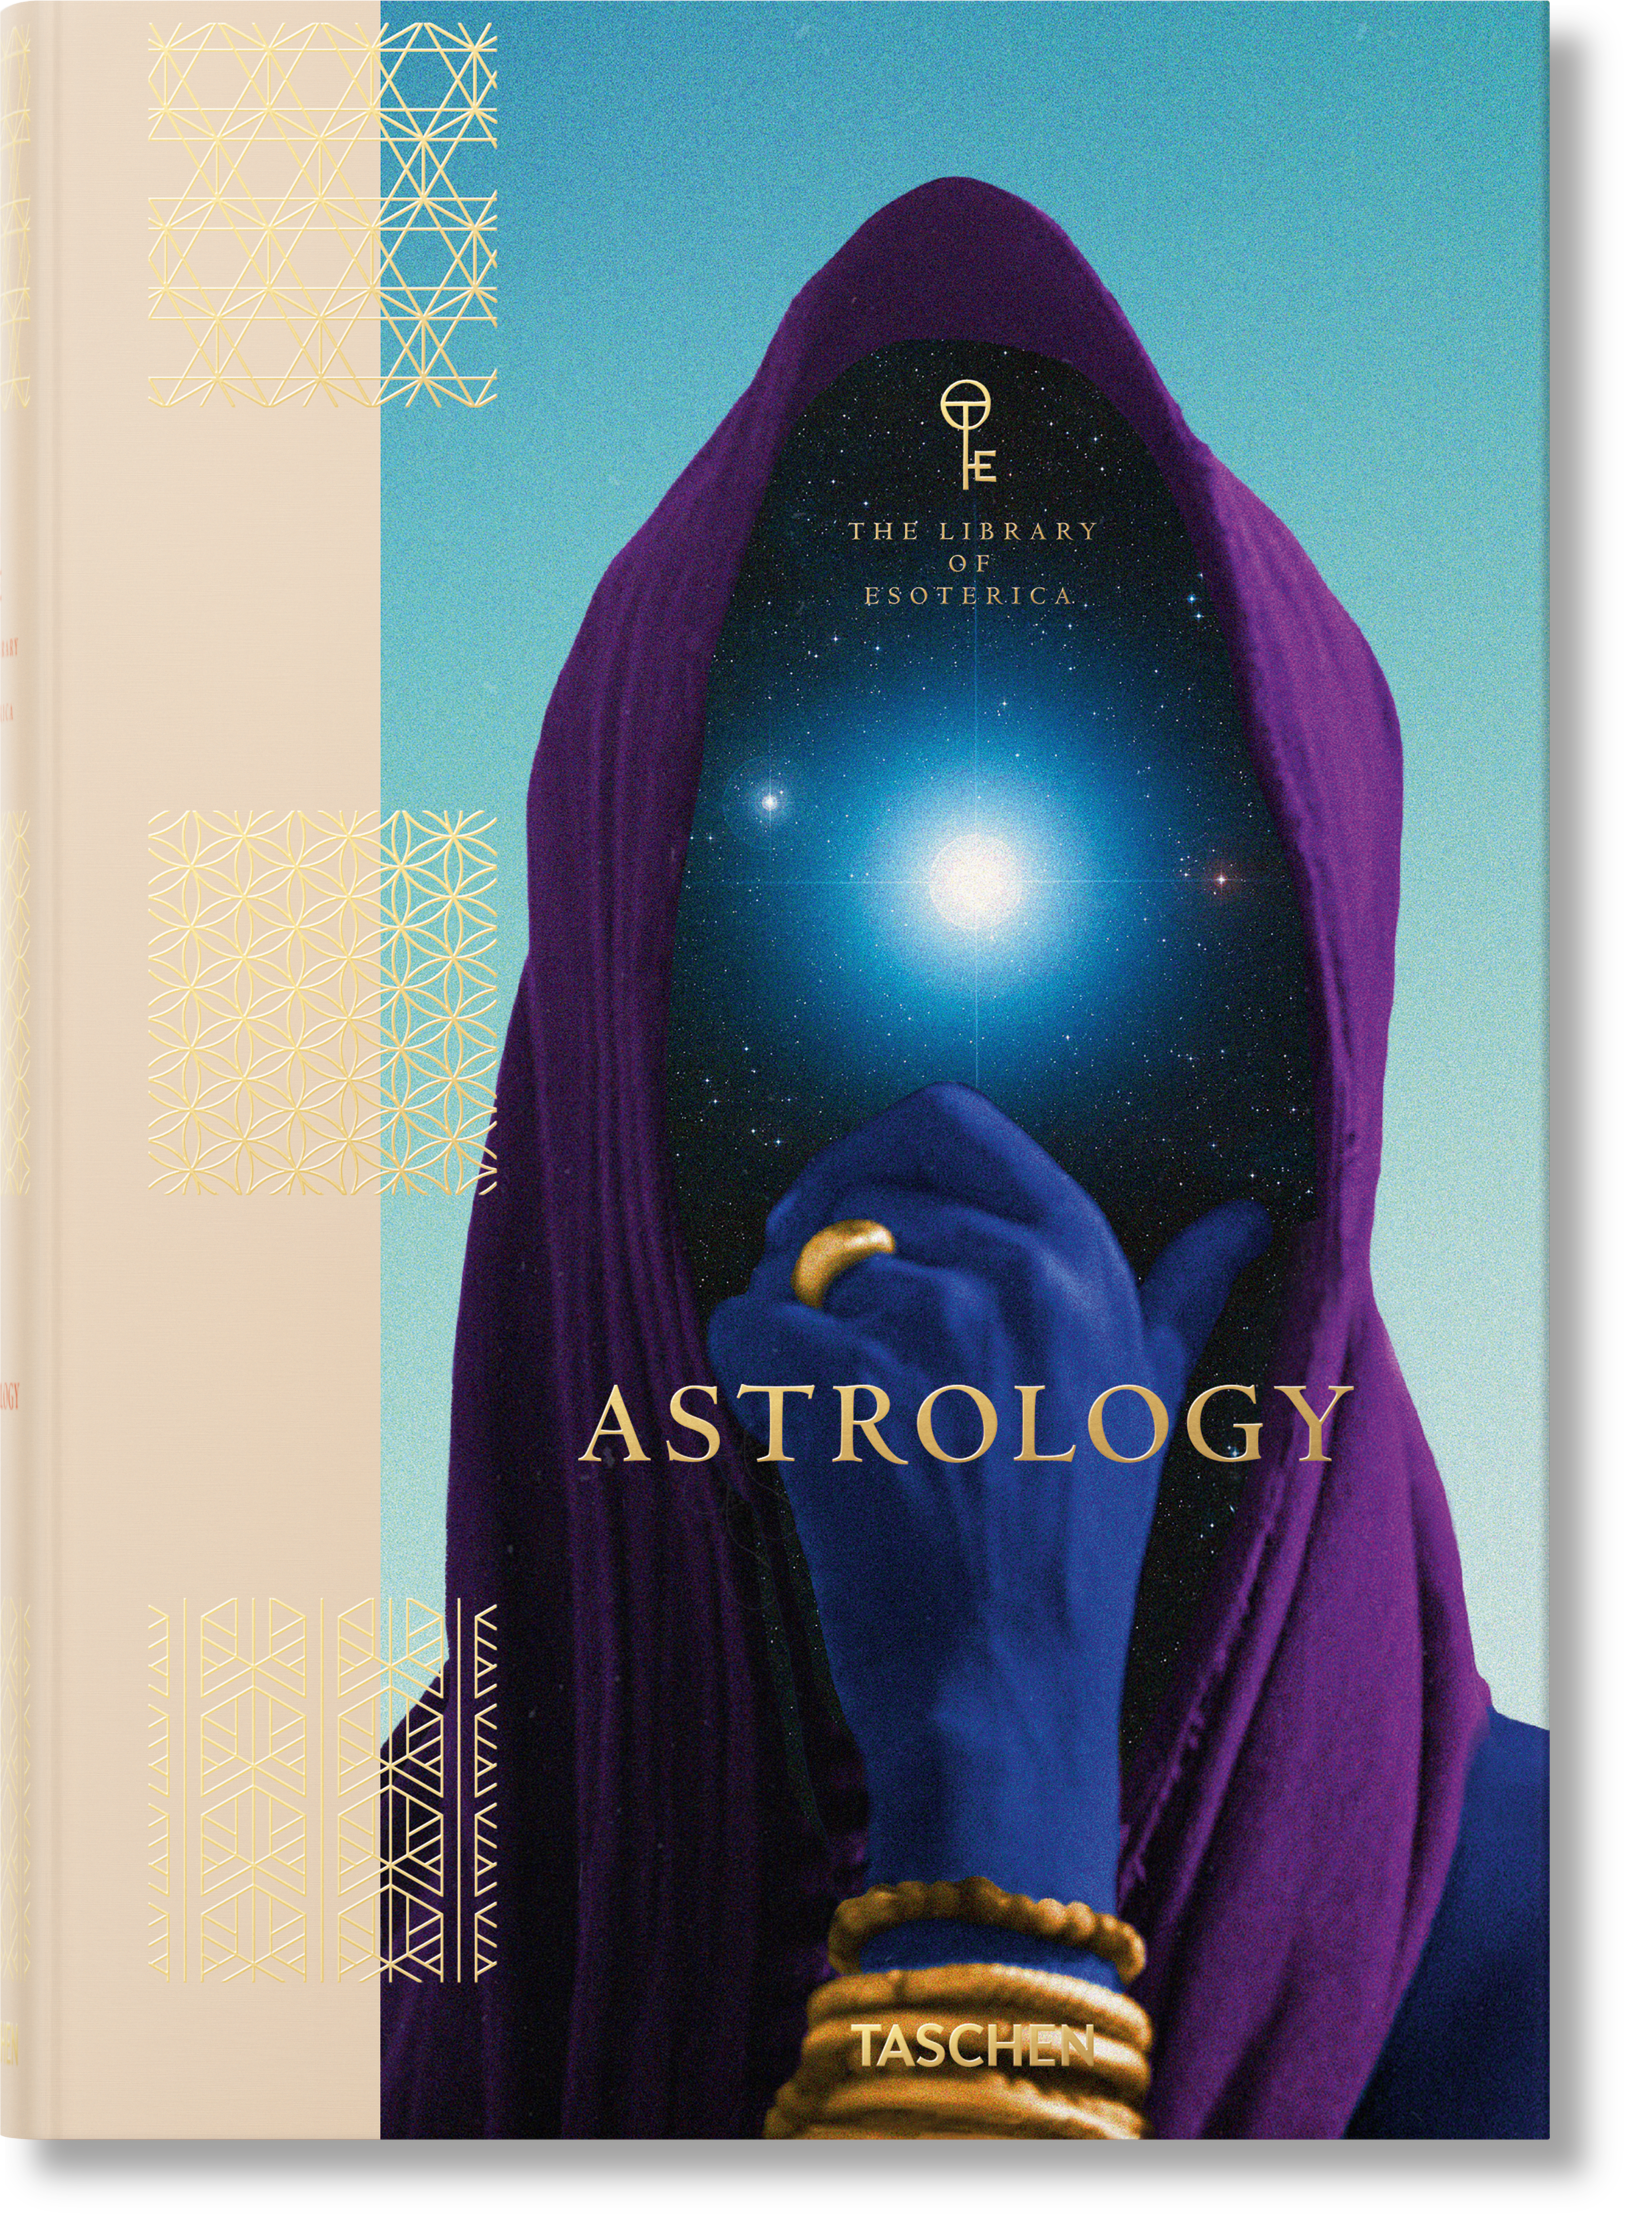 Publication: The Library of Esoterica: Astrology